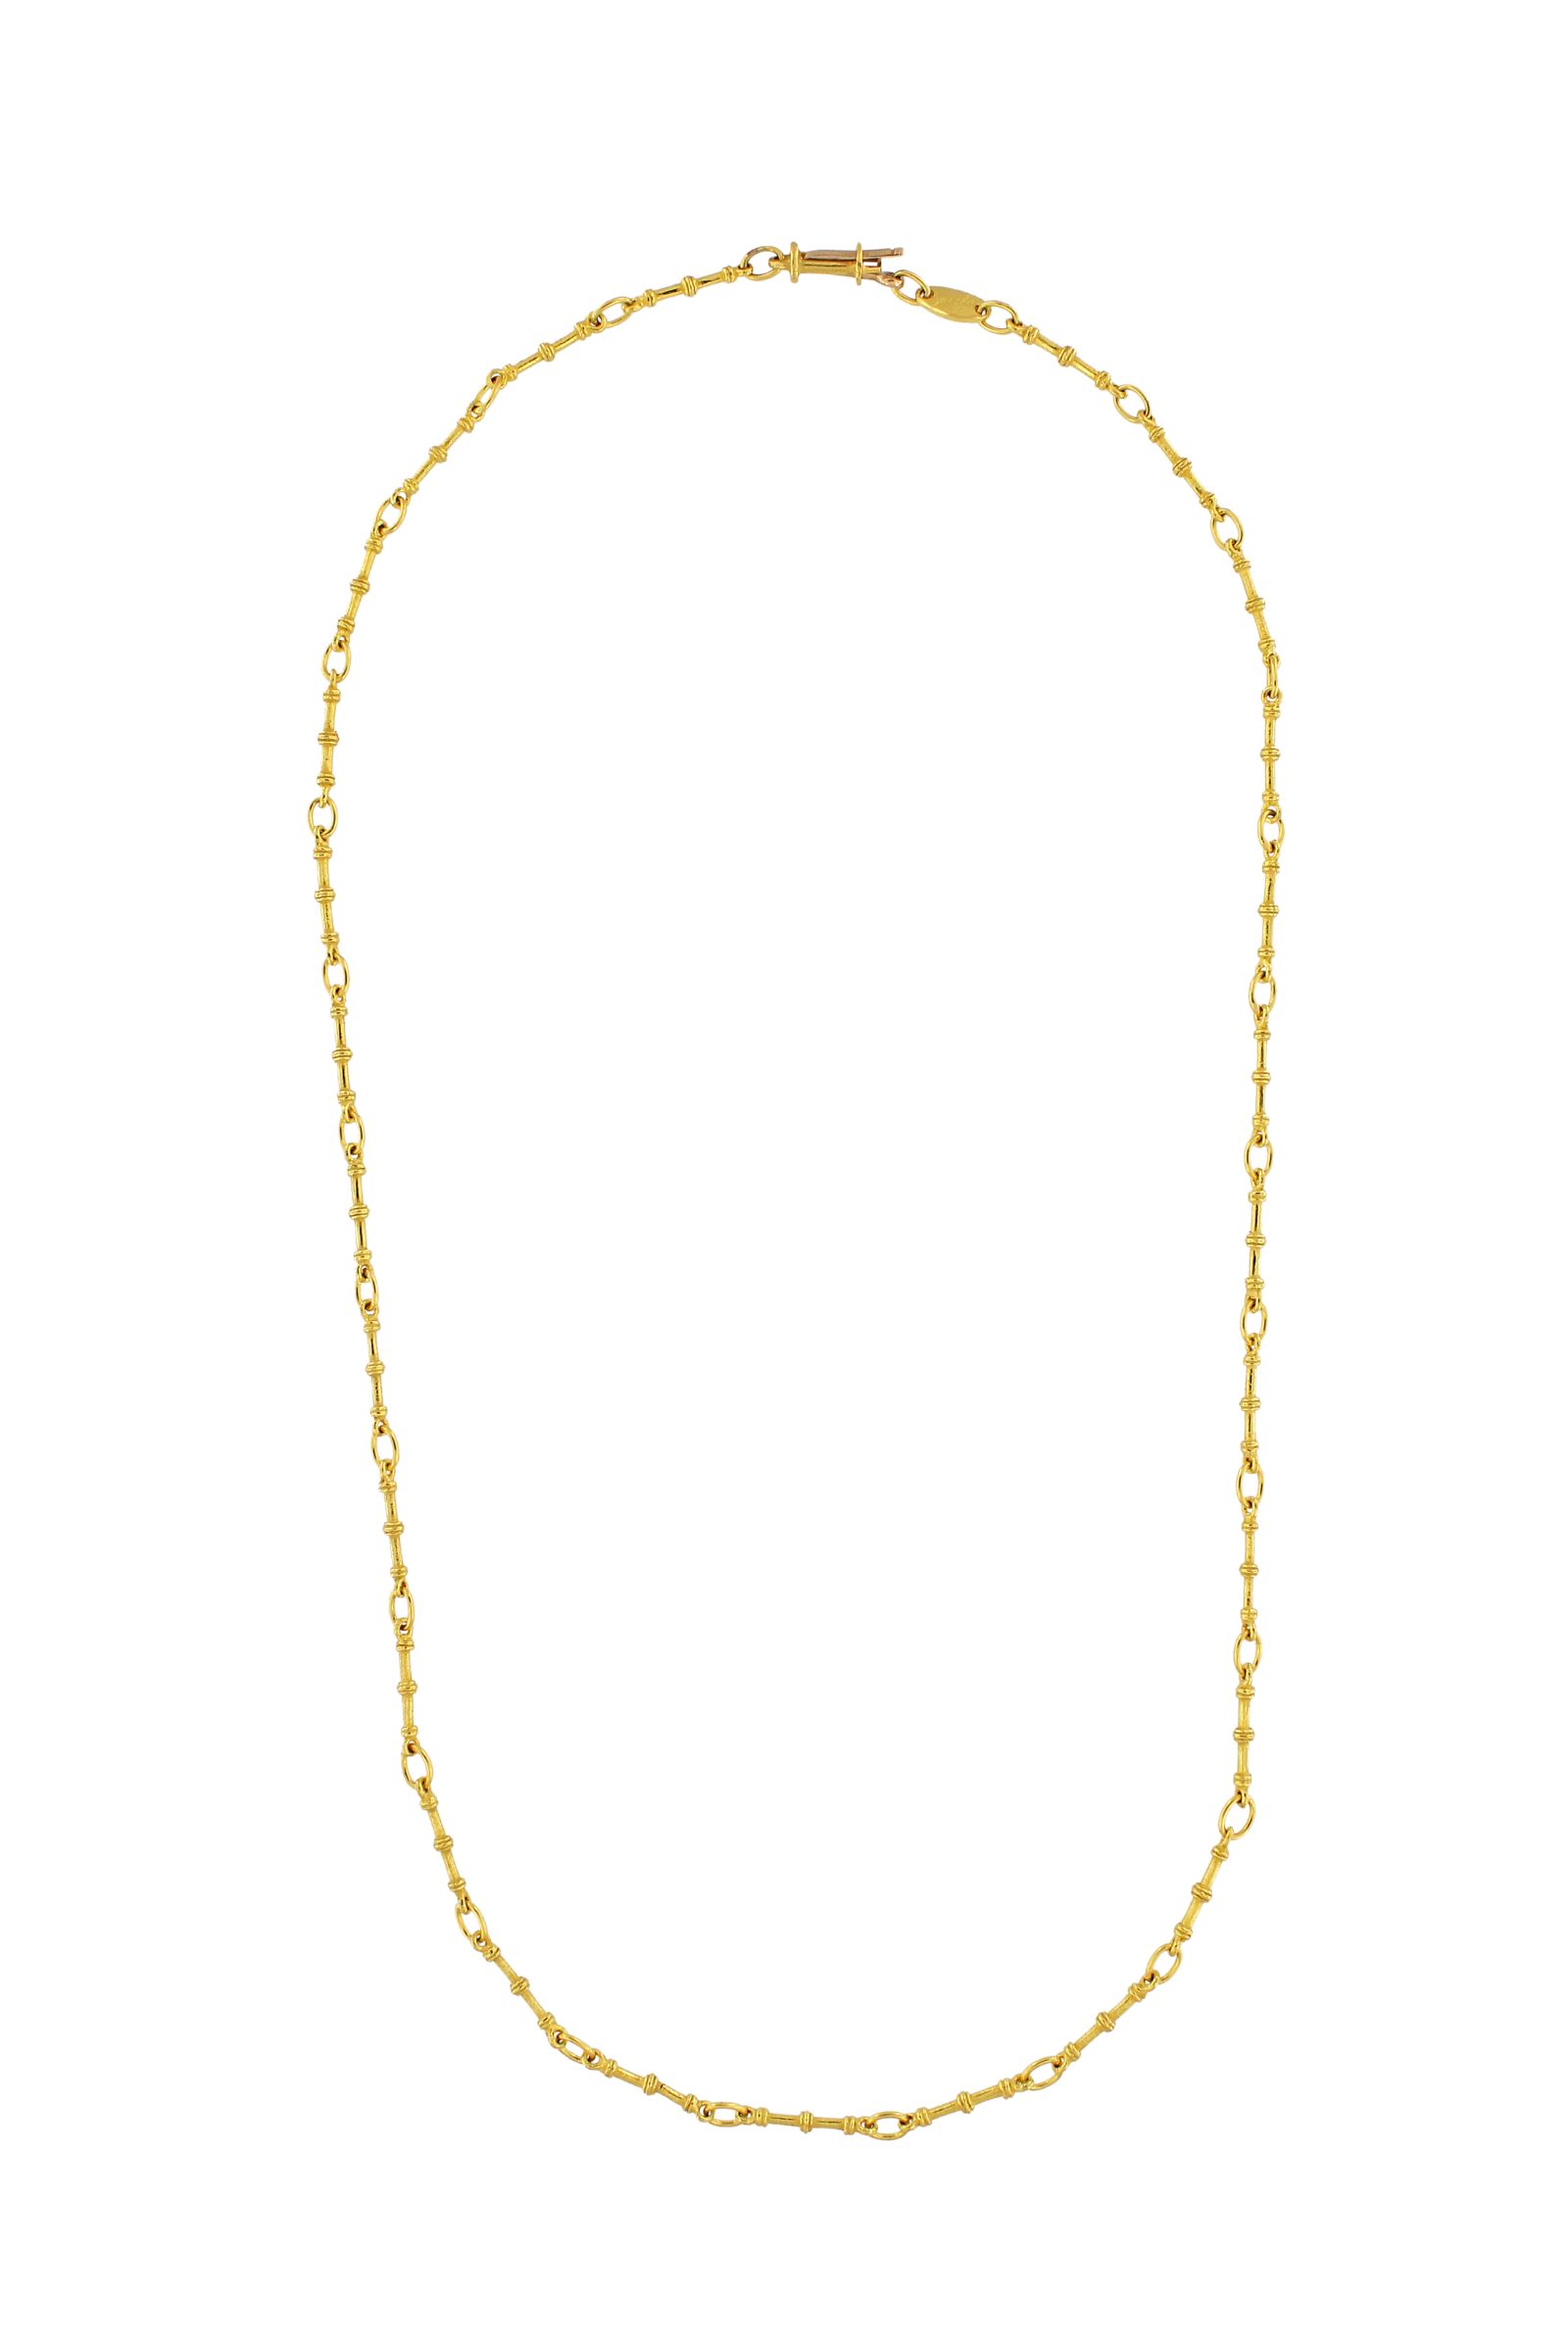 SA1A-18-Kt-Yellow-Gold-Chain-Necklace-1